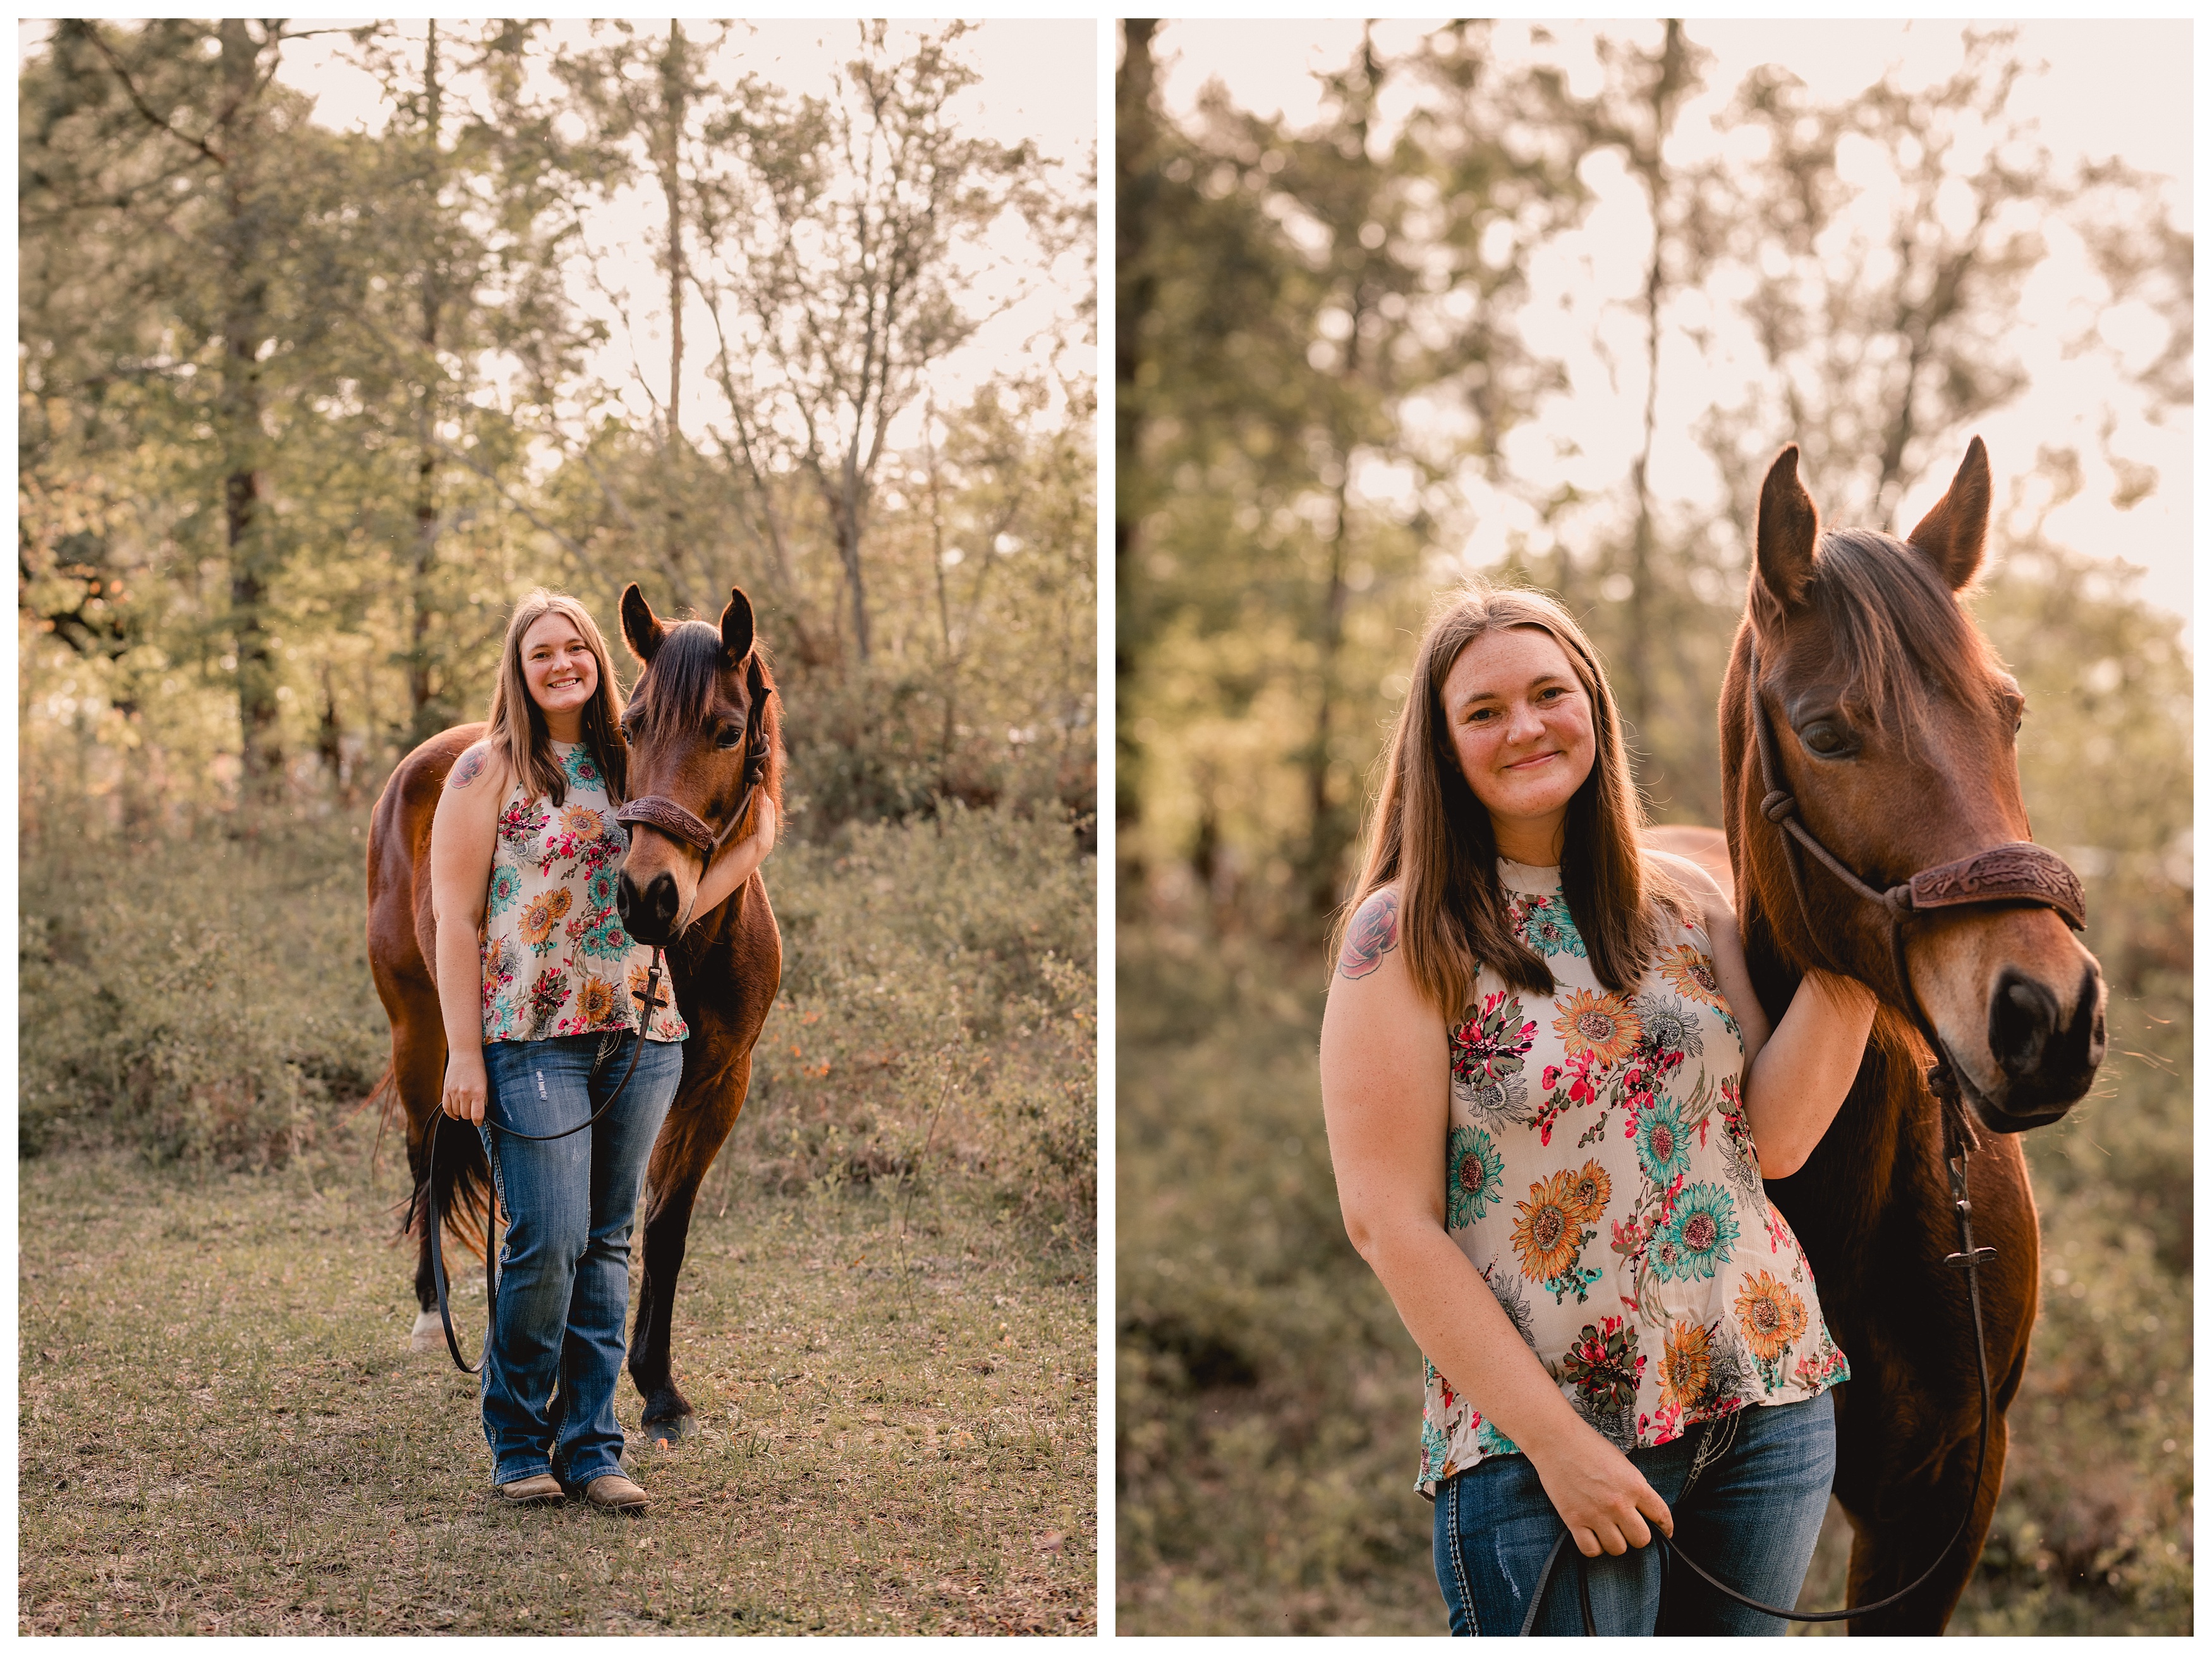 Barrel racer pictures in north Florida capturing the bond between horse and rider. Shelly Williams Photography